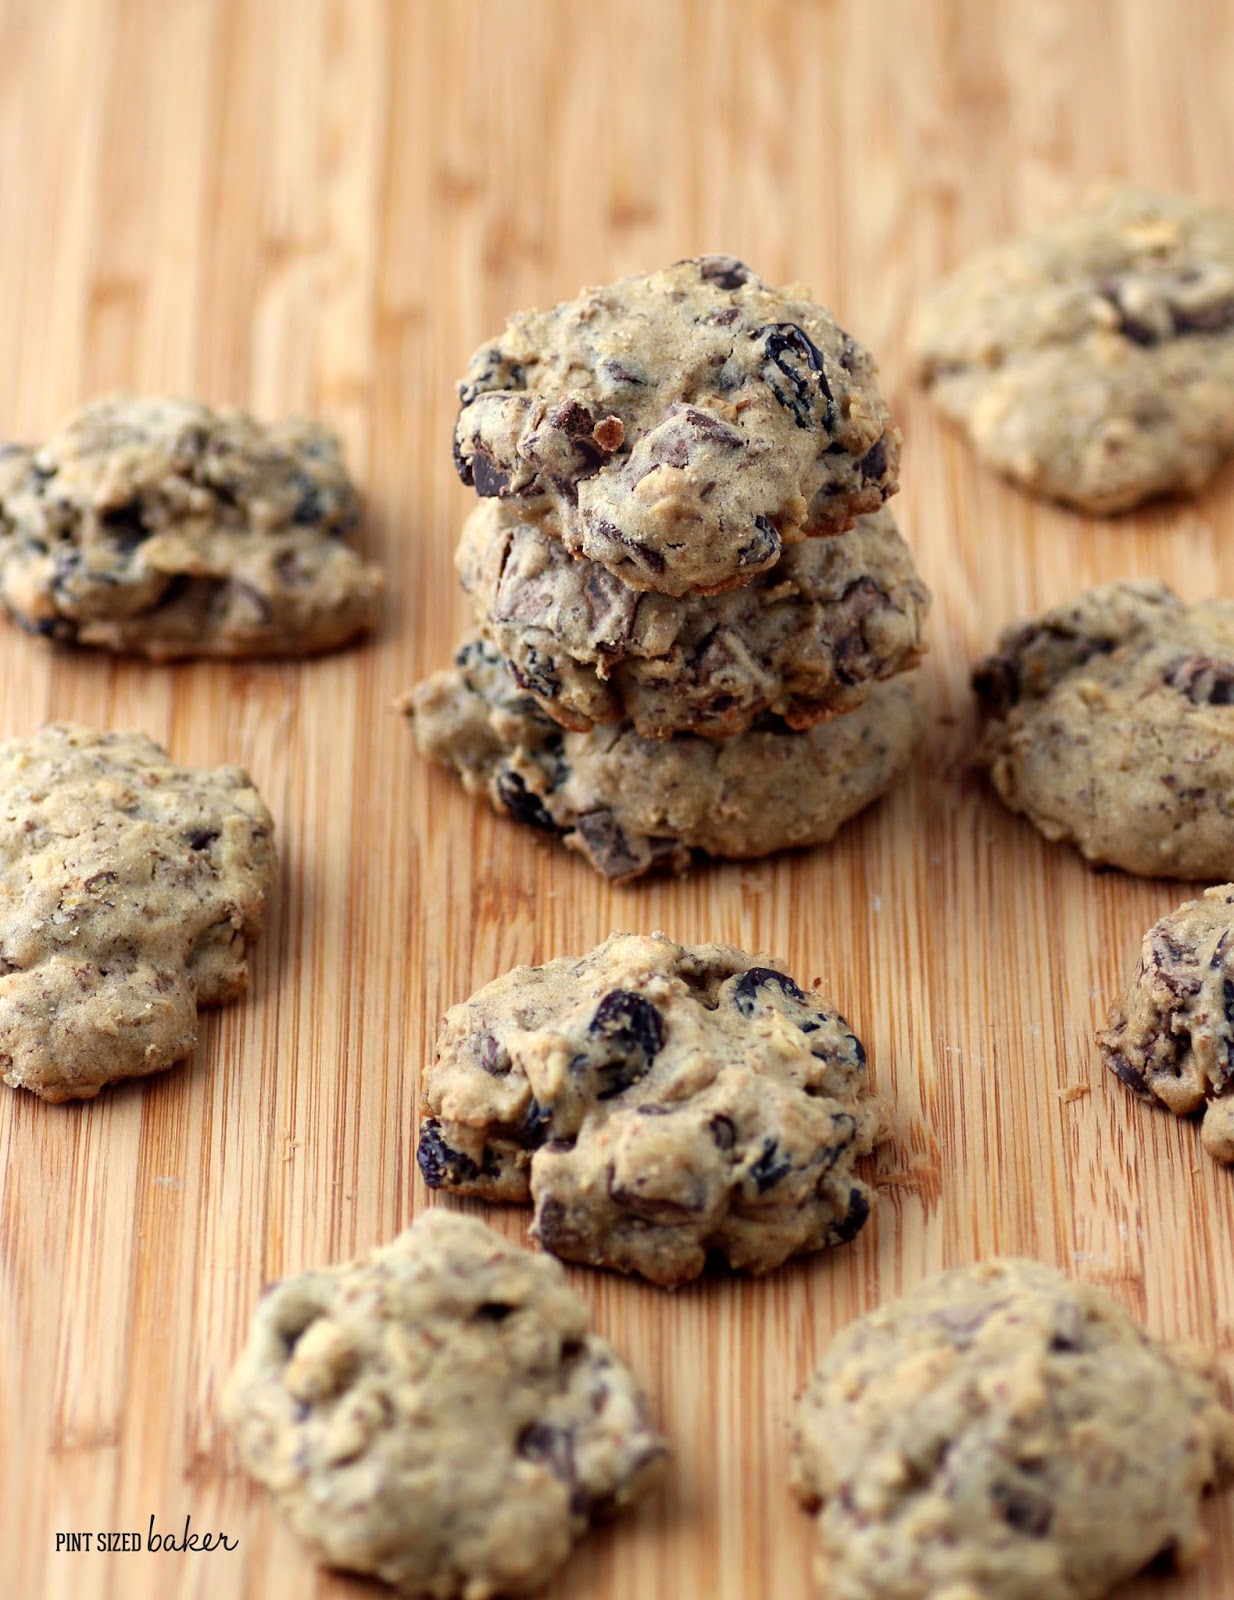 A great recipe for Gluten Free Oatmeal Chocolate Chunk Cookies. The raisins are totally optional, but I loved them!